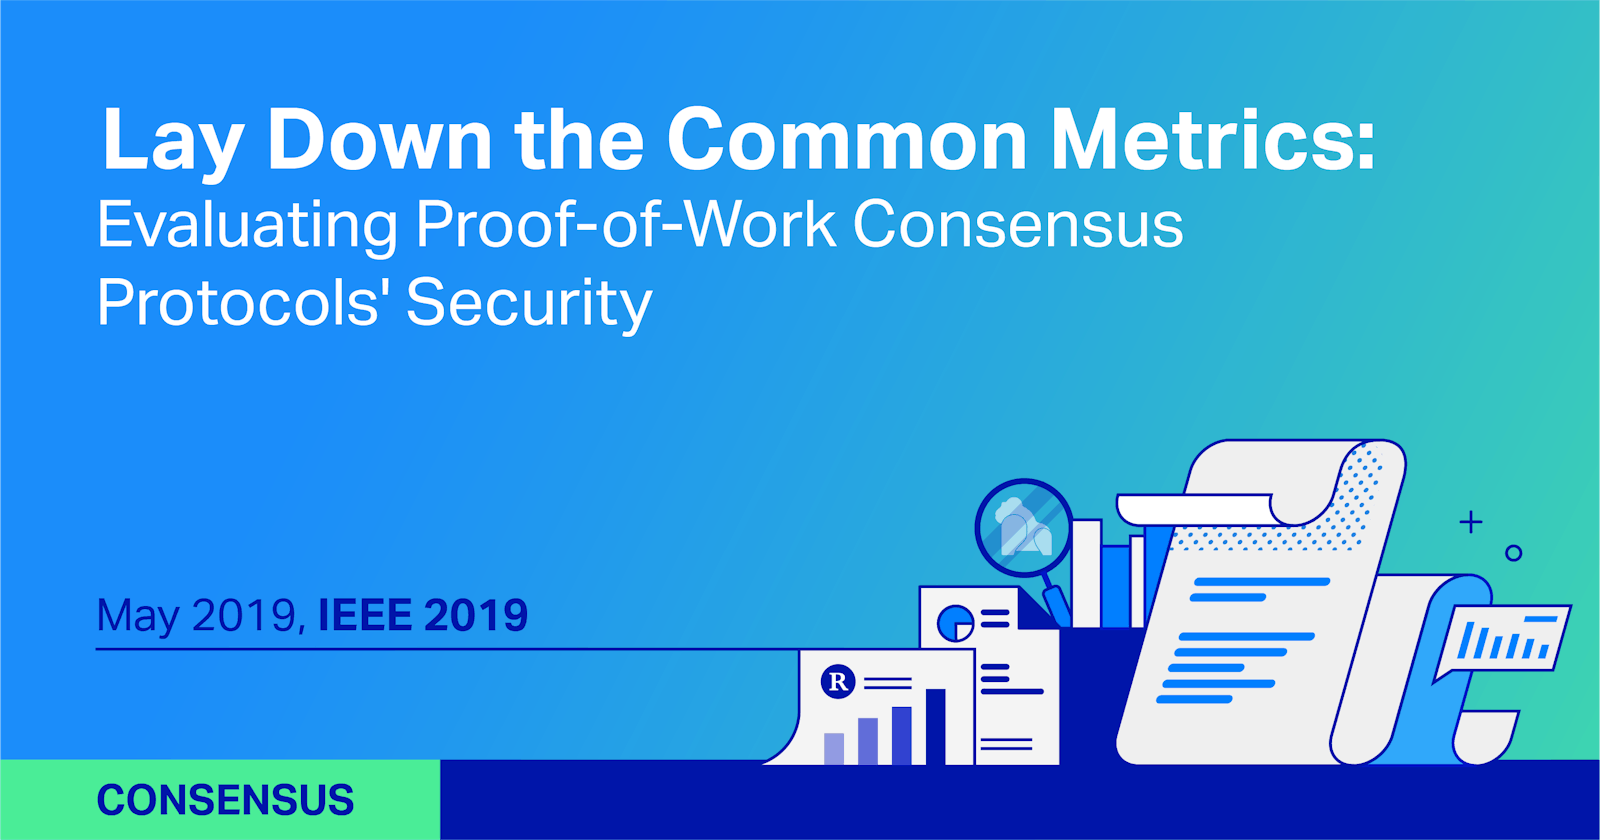 Lay Down the Common Metrics: Evaluating Proof-of-Work Consensus Protocols' Security